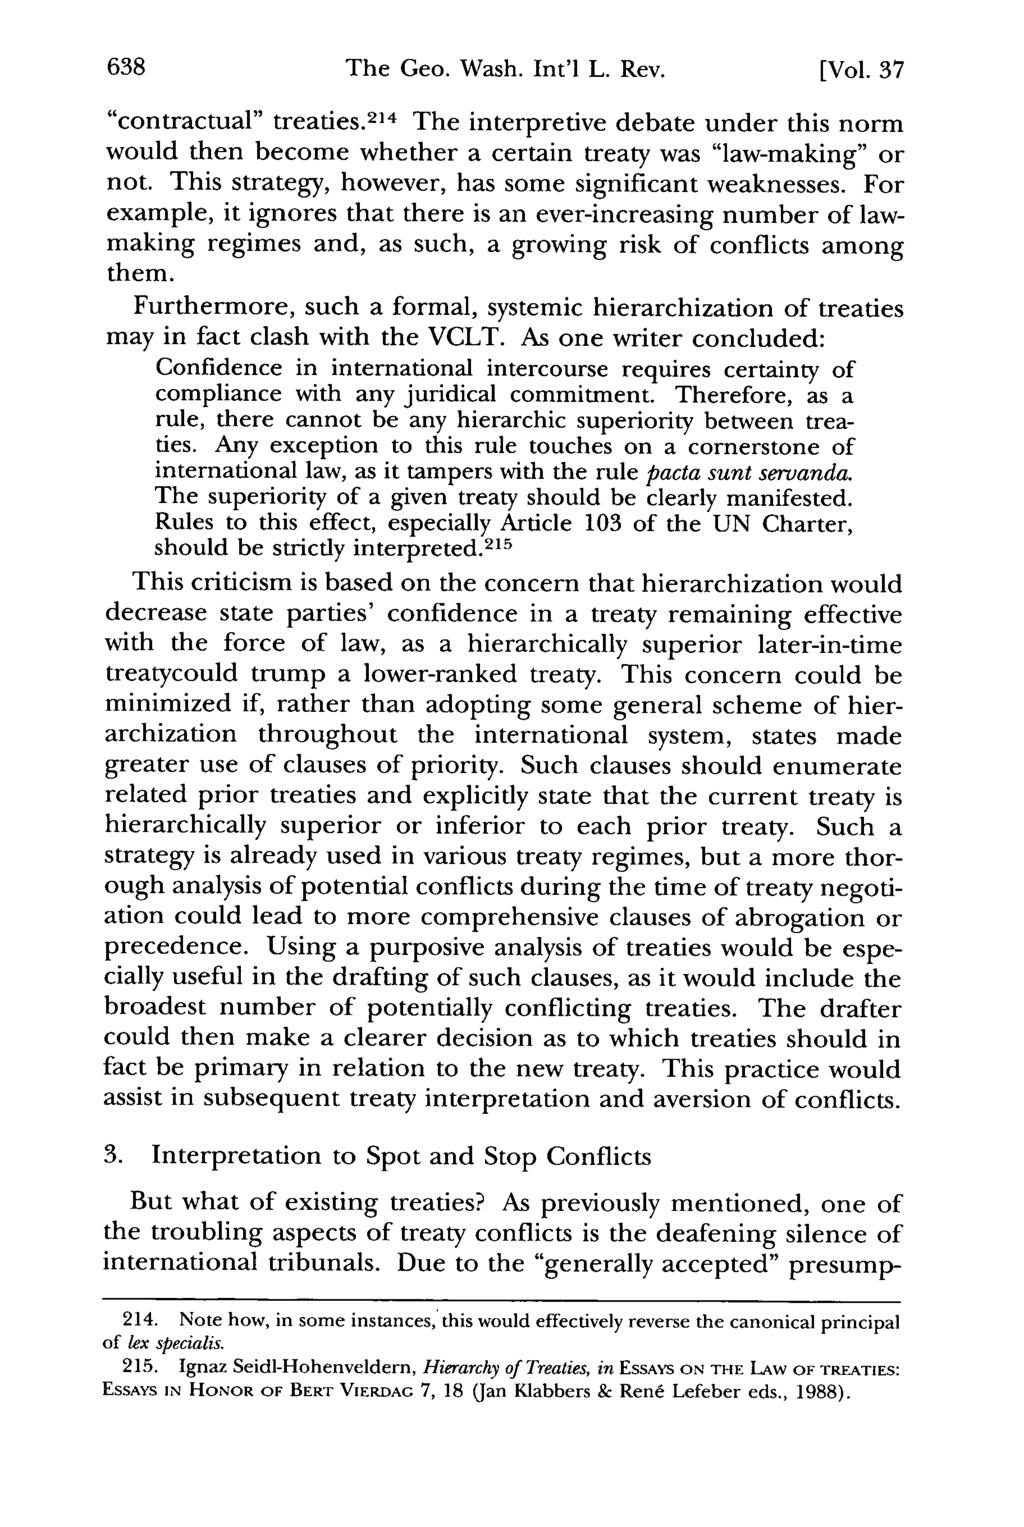 The Geo. Wash. Int'l L. Rev. [Vol. 37 "contractual" treaties. 214 The interpretive debate under this norm would then become whether a certain treaty was "law-making" or not.